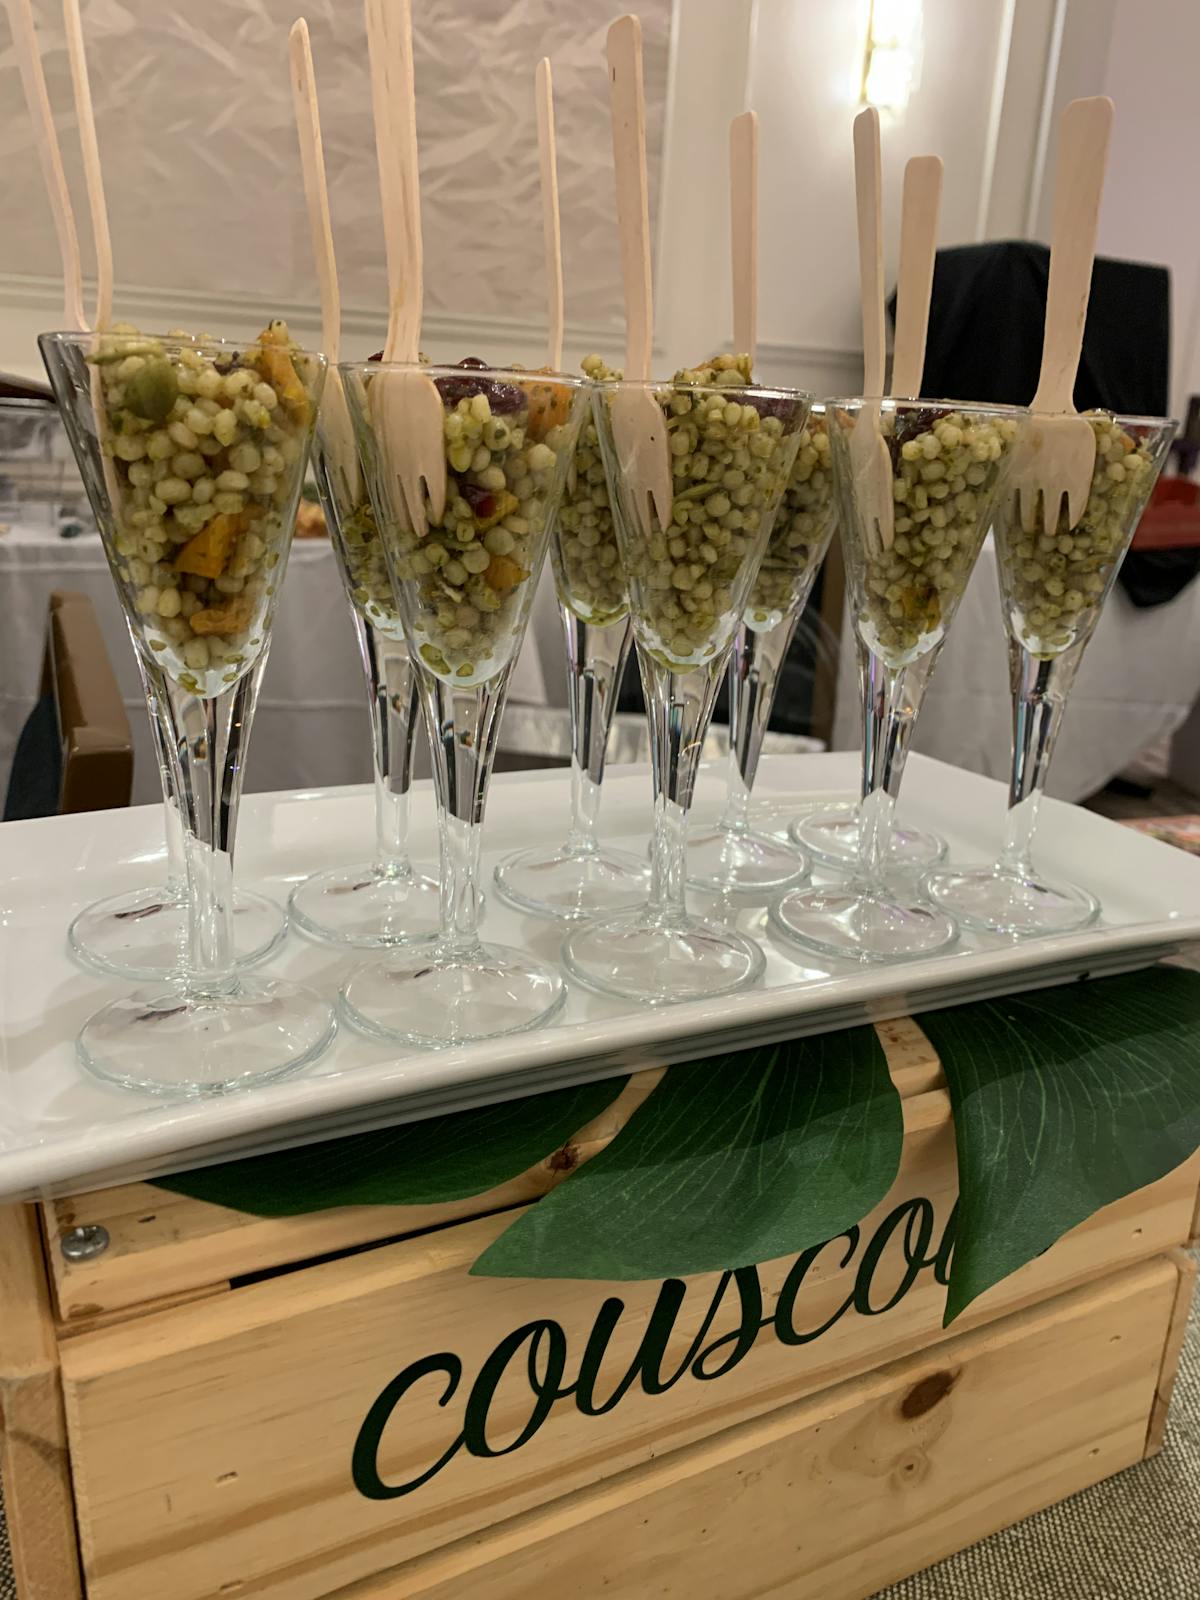 a row of wine glasses on a table